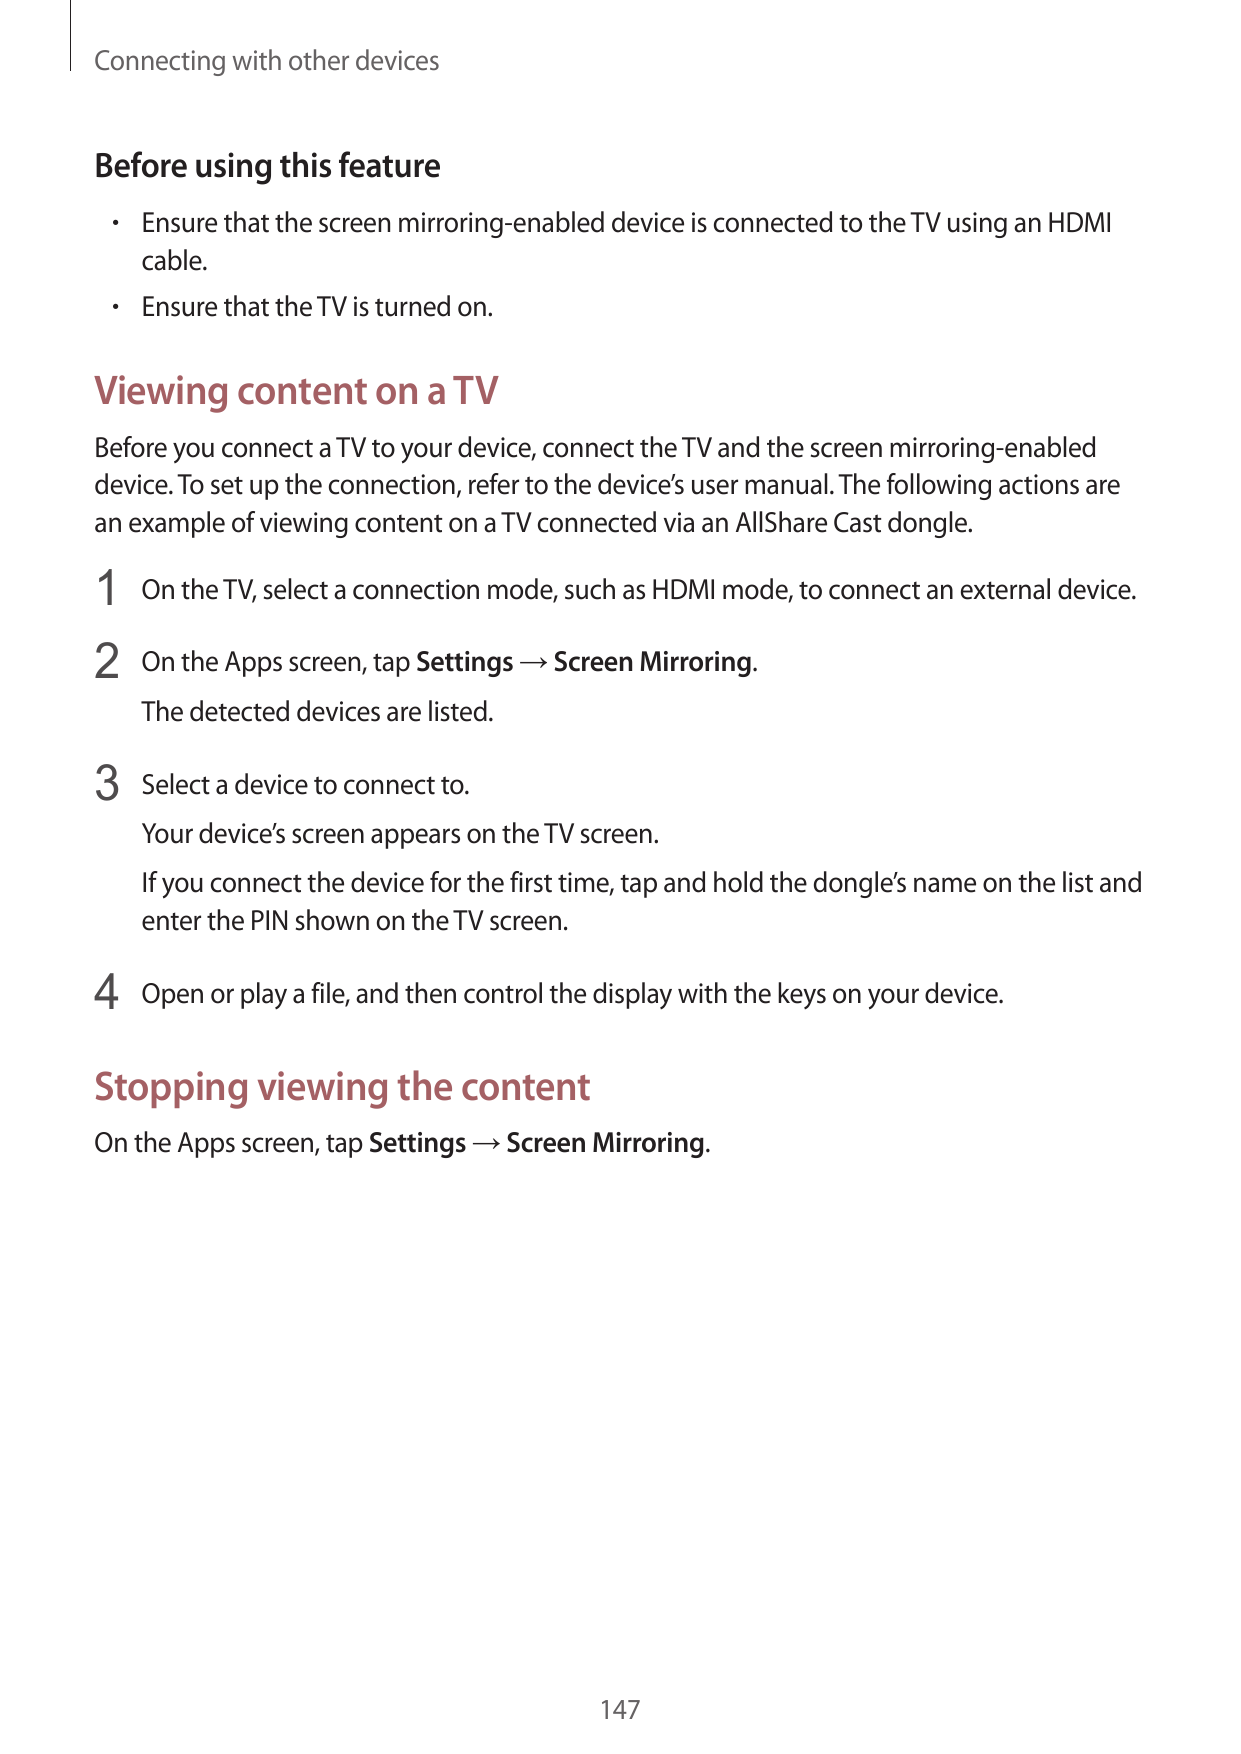 Connecting with other devicesBefore using this feature• Ensure that the screen mirroring-enabled device is connected to the TV u